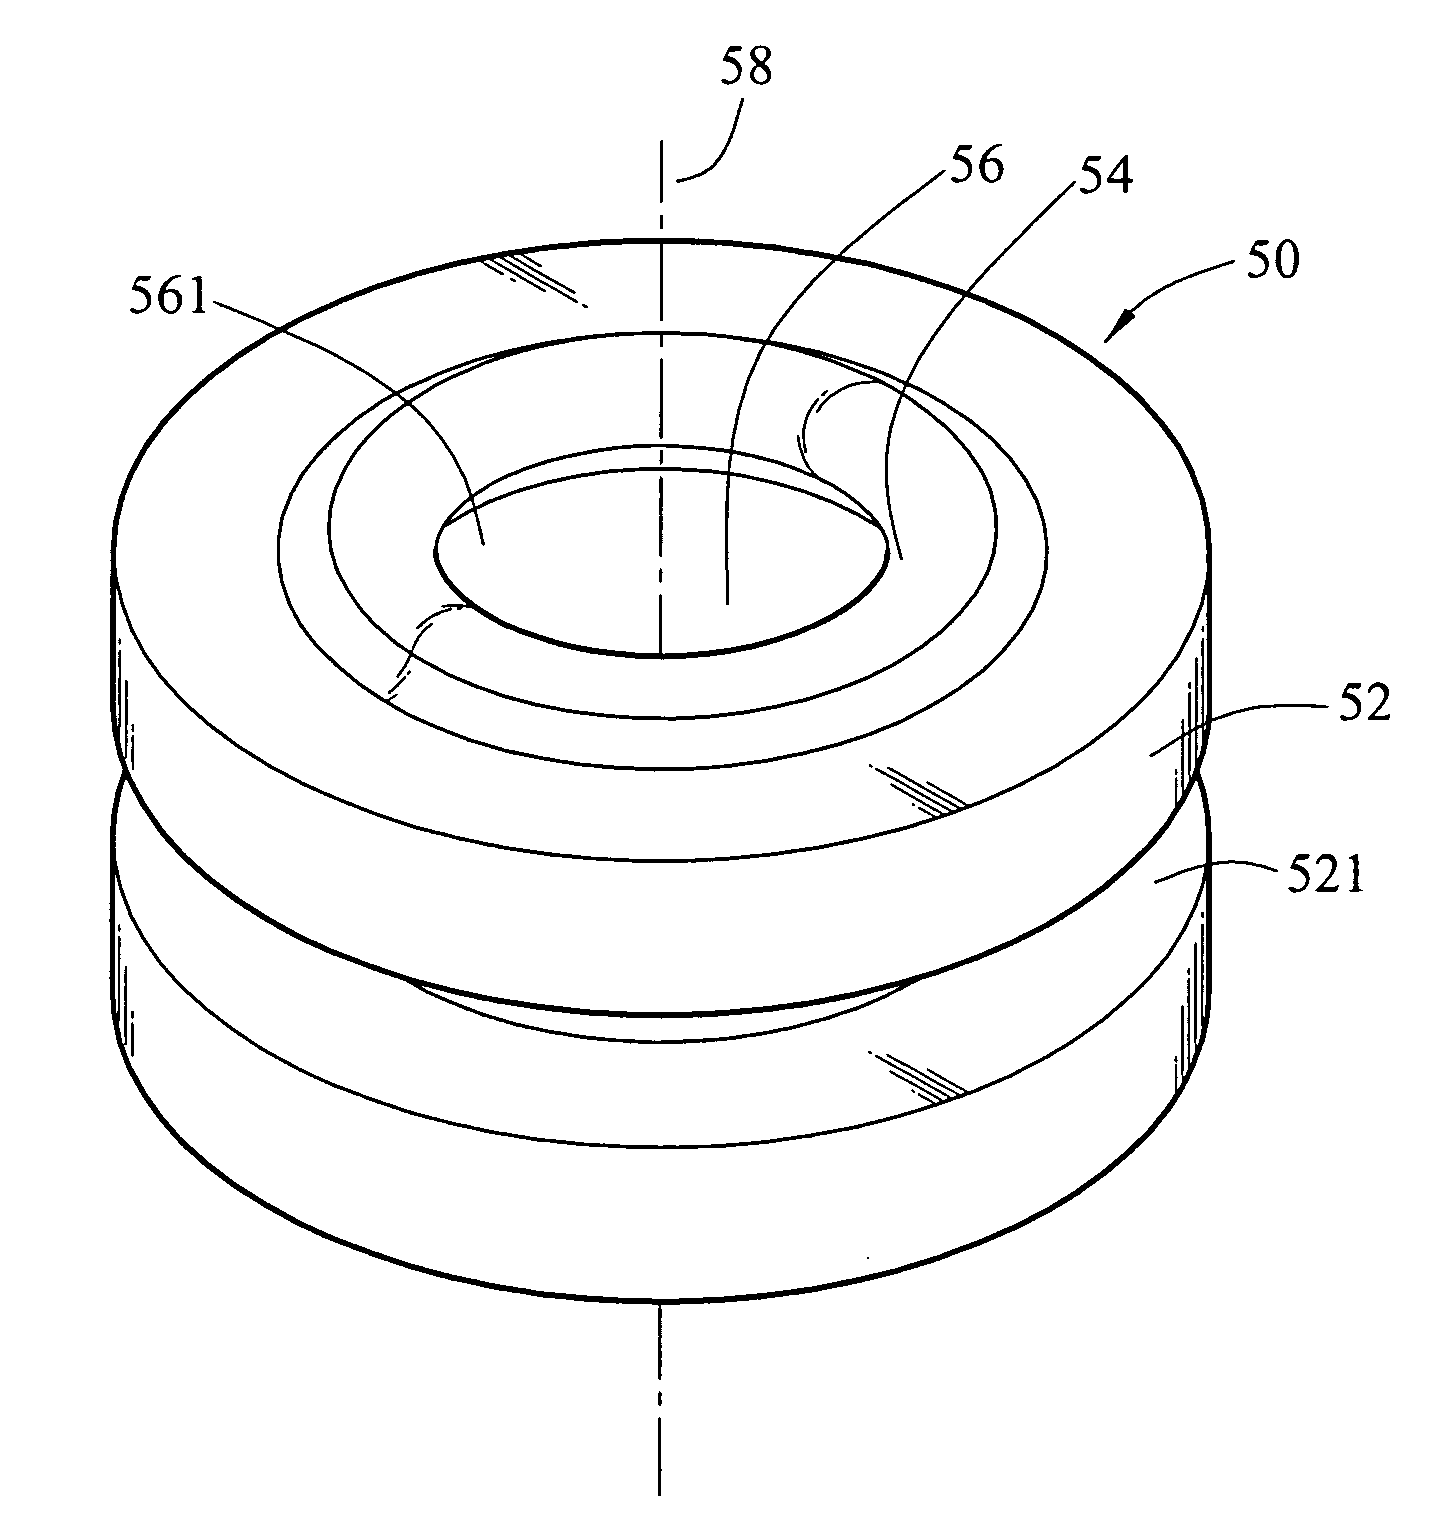 Damping ring for vibration isolation